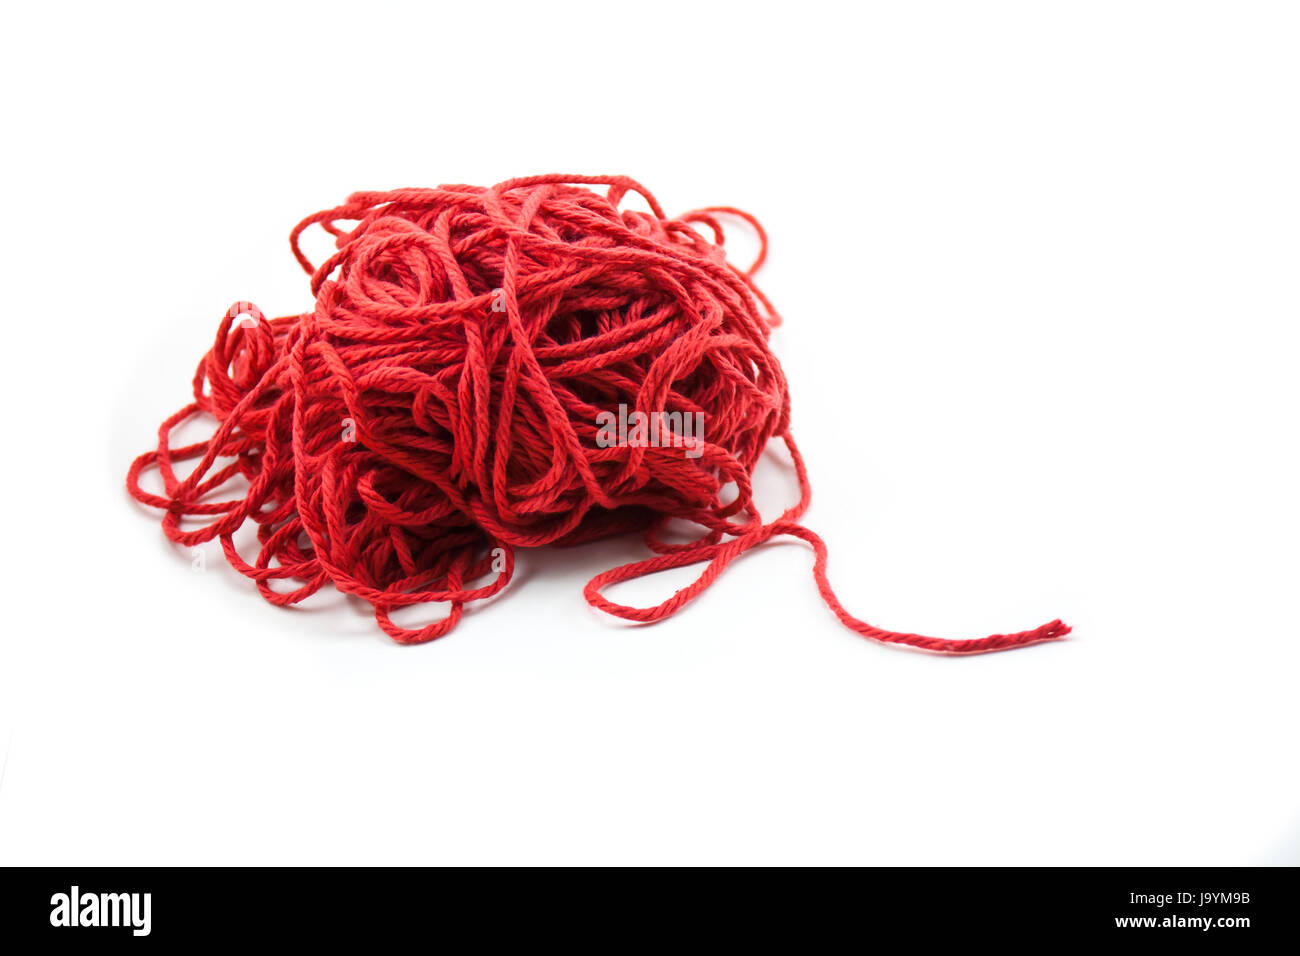 Tangled pile of red yarn with a single piece leading out, isolated on white. Stock Photo